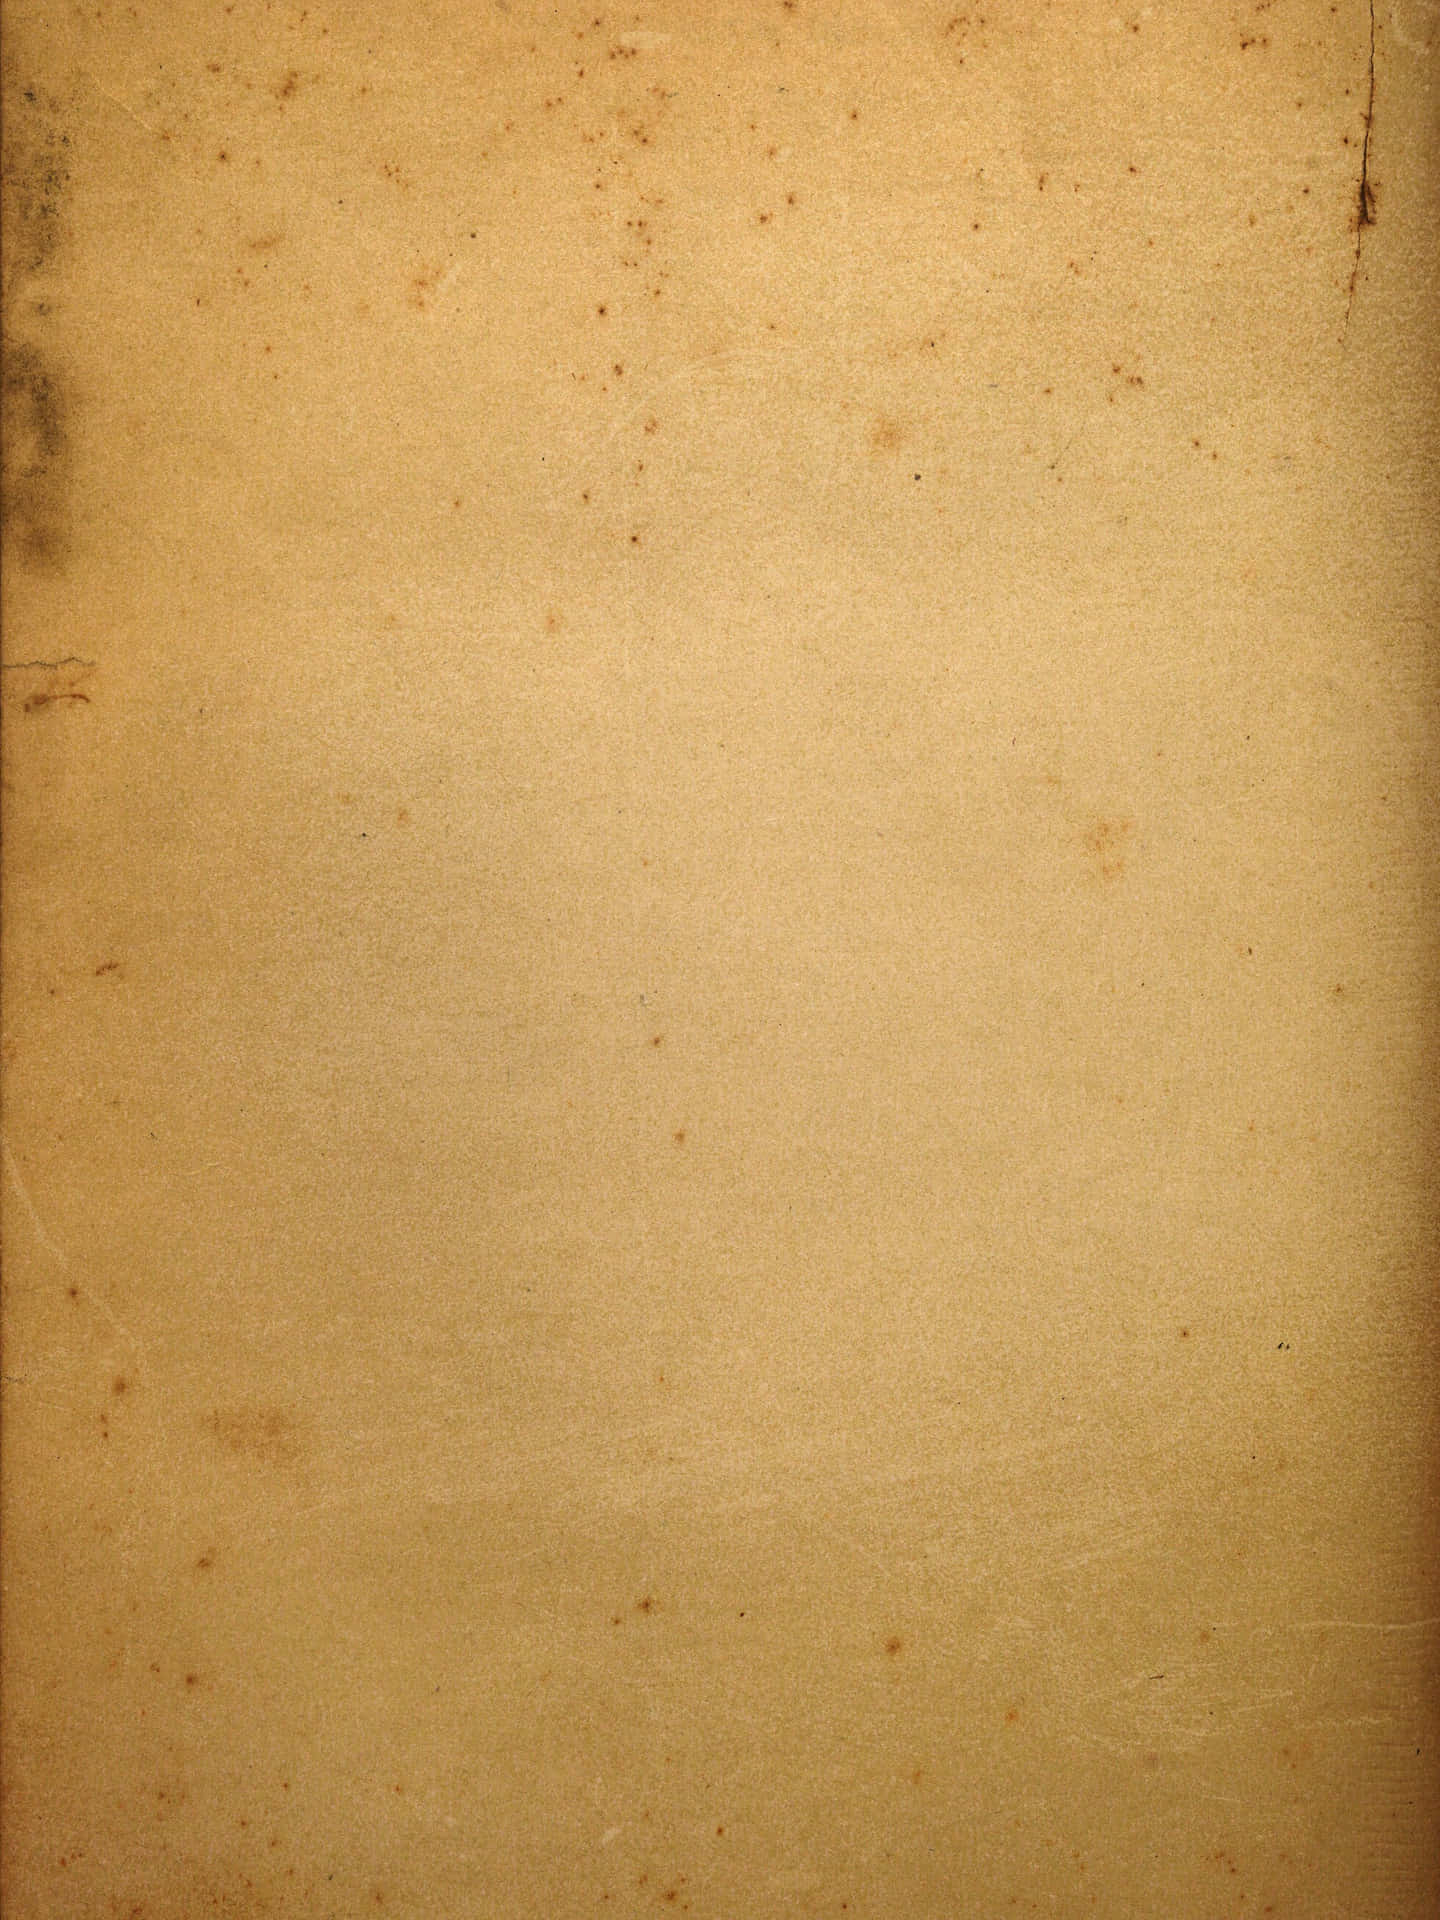 An old square paper texture